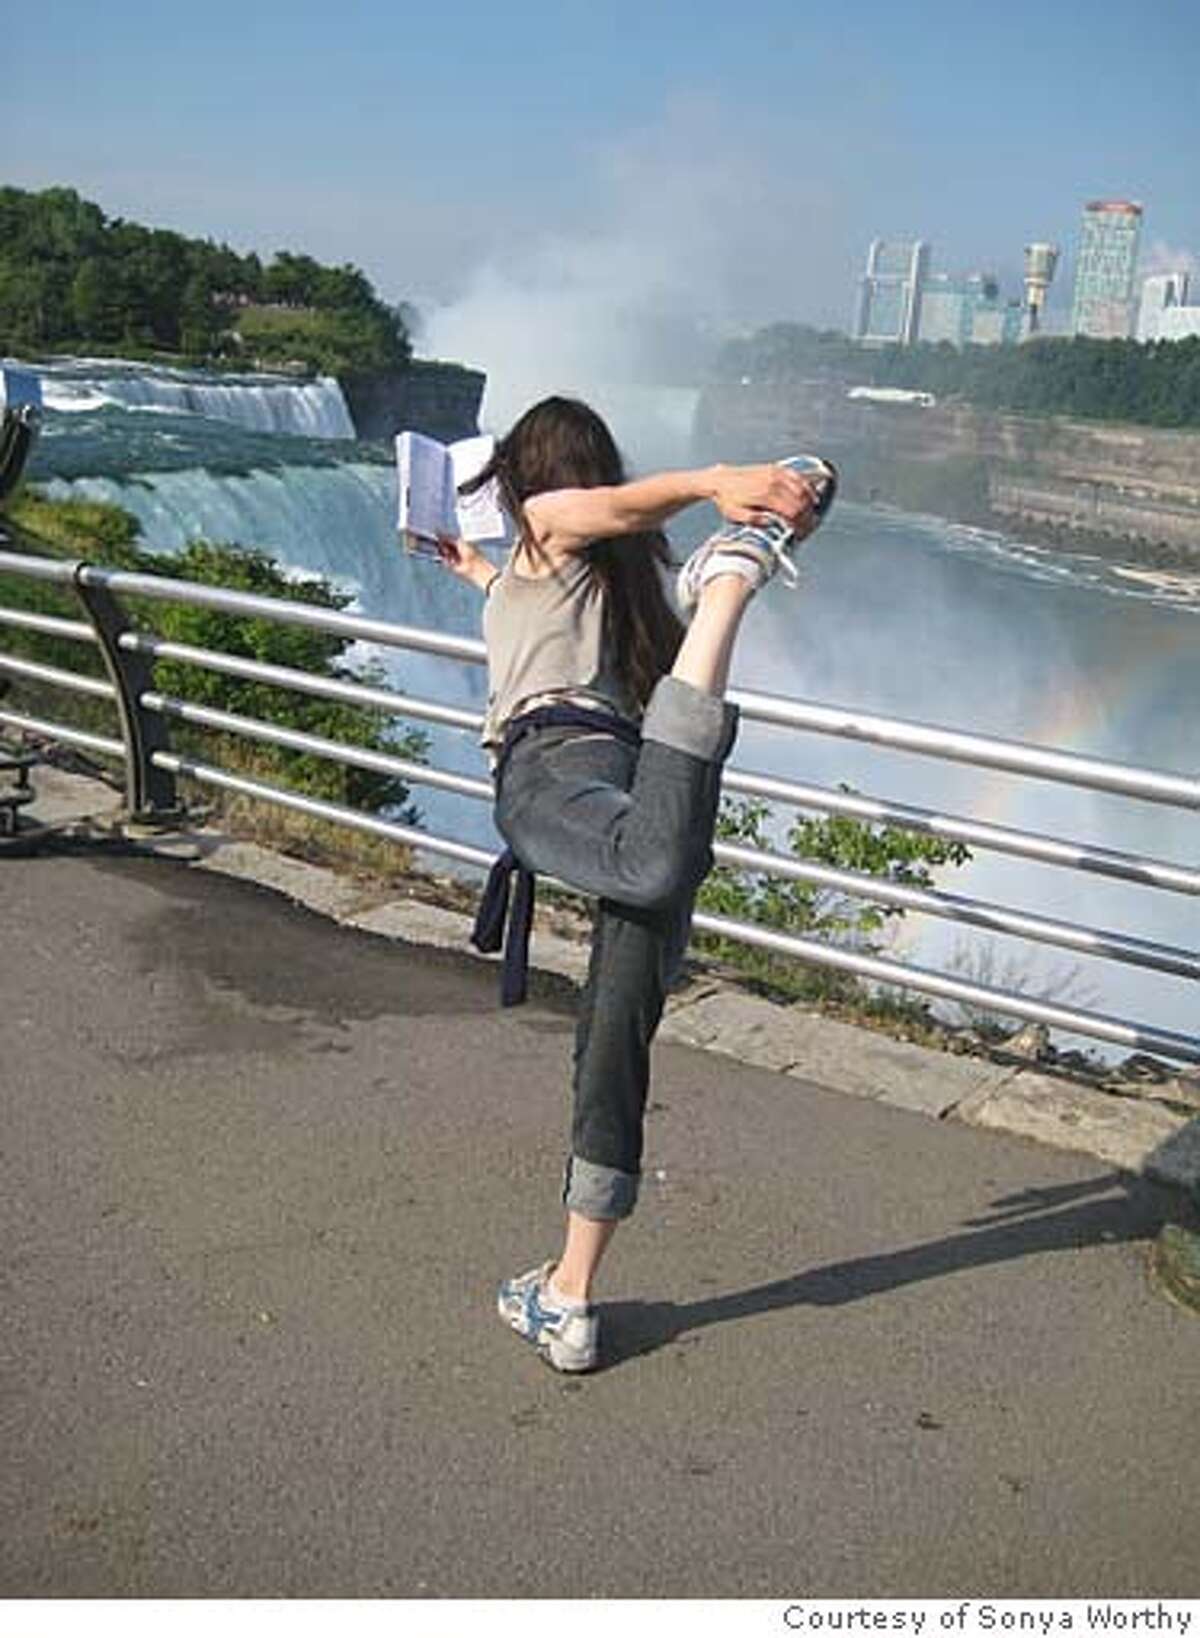 At Niagara Falls (Me) Stretching after a 23 hours of sitting on the bus and reading USA & Canada on a Shoestring, by Robert Reid, Rebecca Blond, Loretta Chilcoat, Jeremy Chipman, Tom Downs, Michael Grosberg, Jeff Hill, Graham Neale, Andrew Dan Nystrom, Michael Read, and Emily K Woman. Photo courtesy of sonya worthy